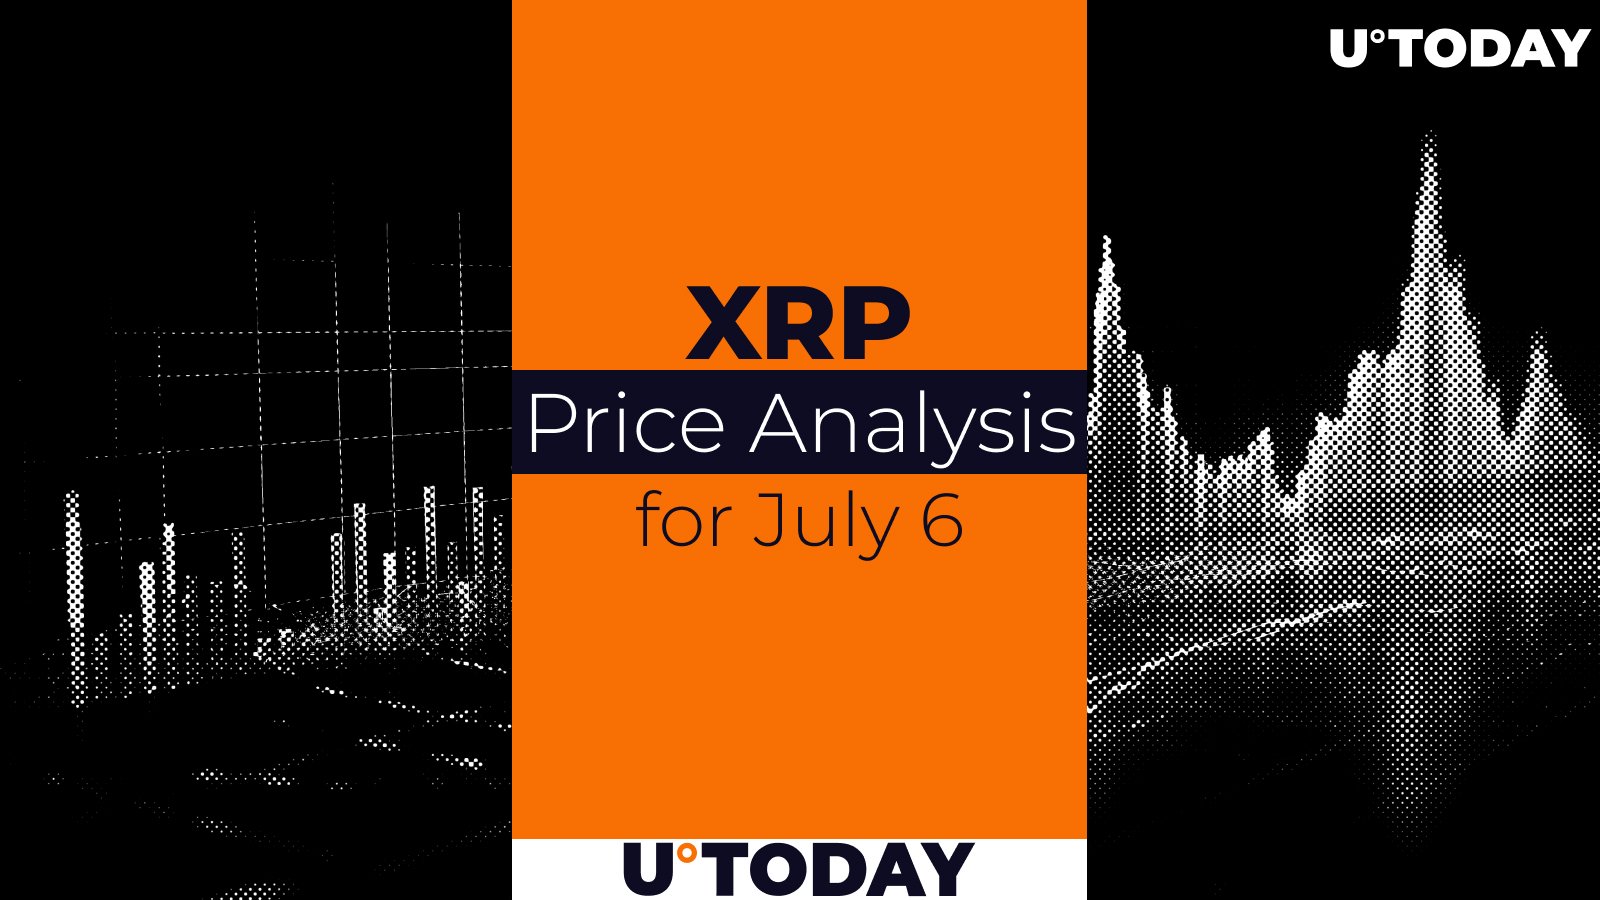 XRP Price Prediction for July 6